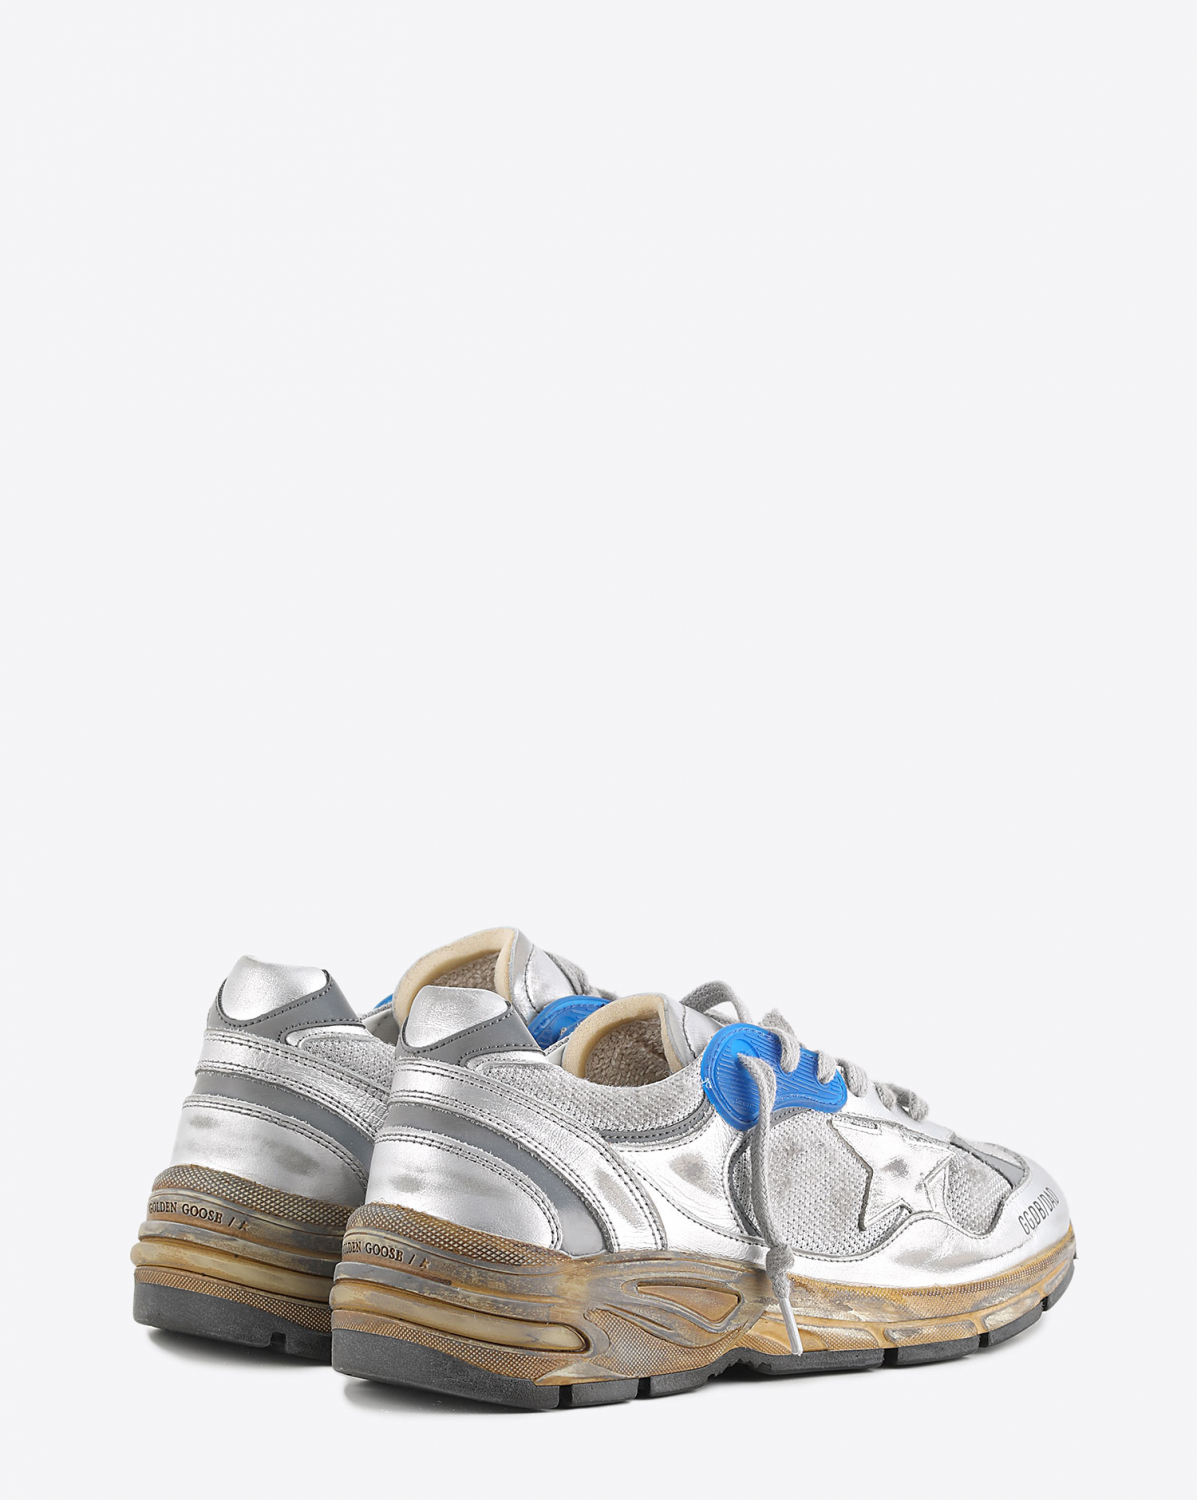 Sneakers running dad white silver 70137 Golden Goose. 